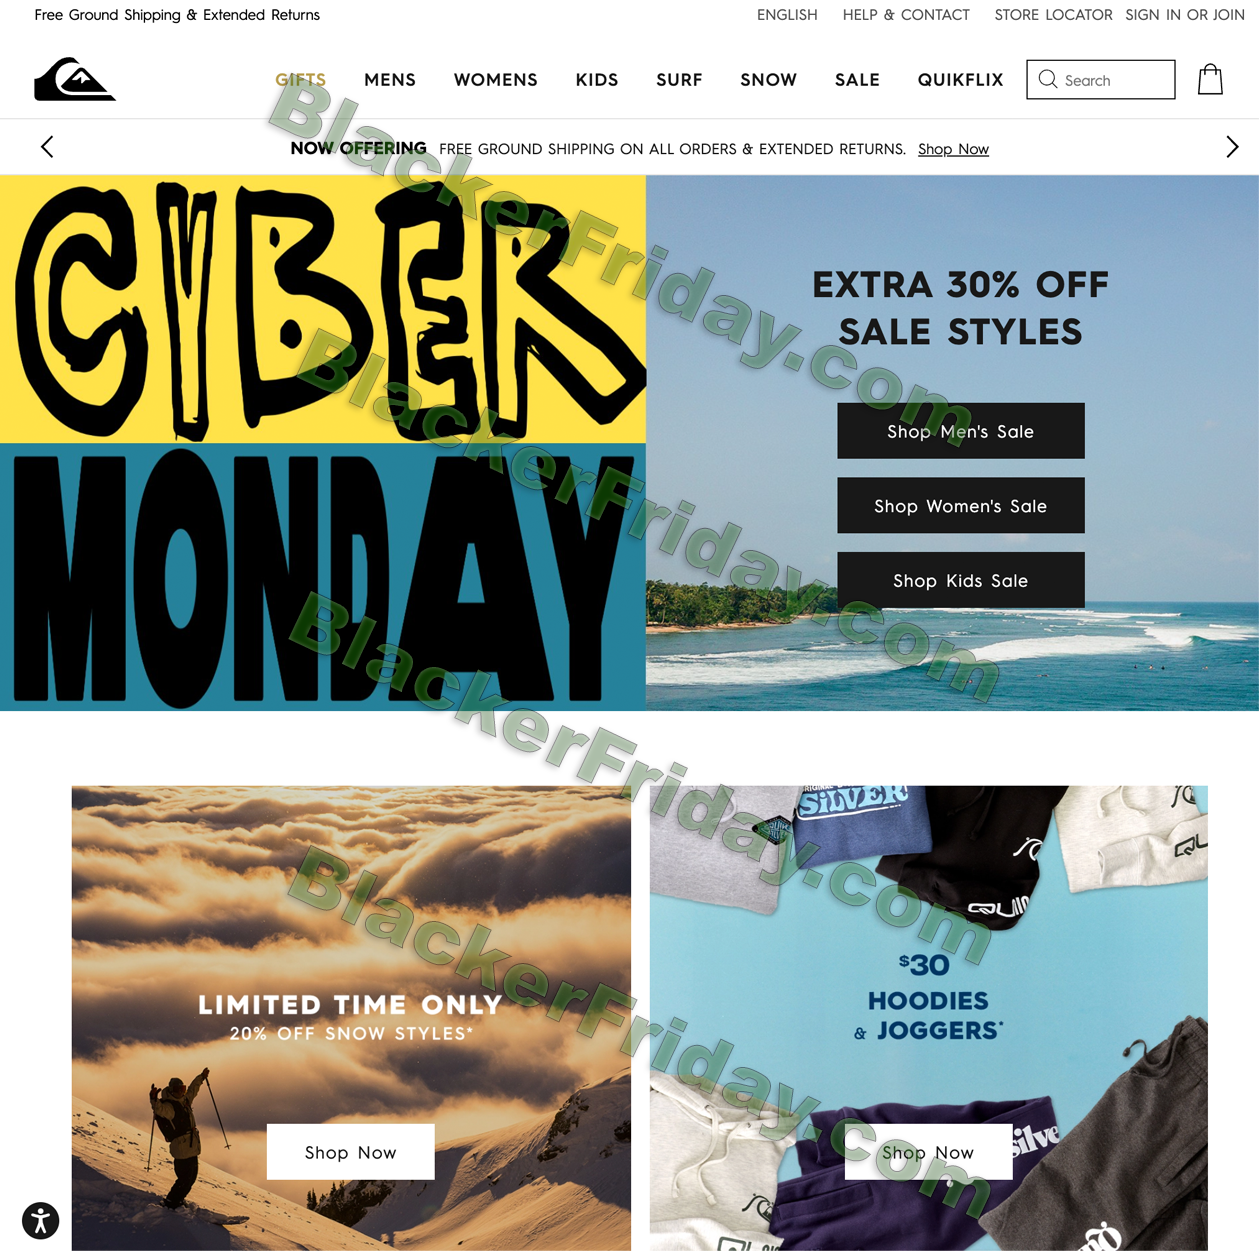 Quiksilver Cyber Monday Sale 2021 What To Expect Blacker Friday